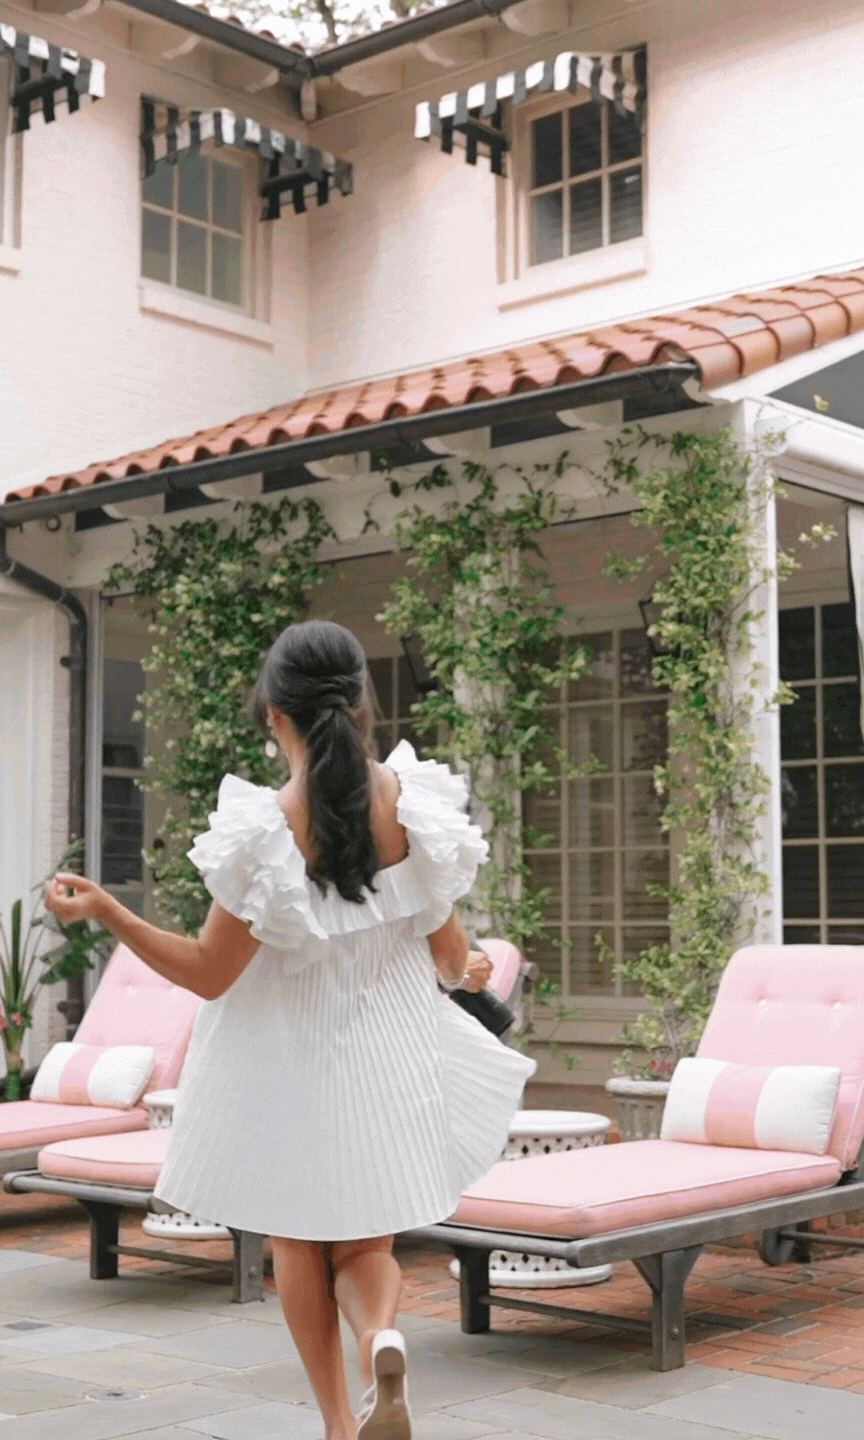 GIF of Cassie Loree skipping and taking photos with her camera